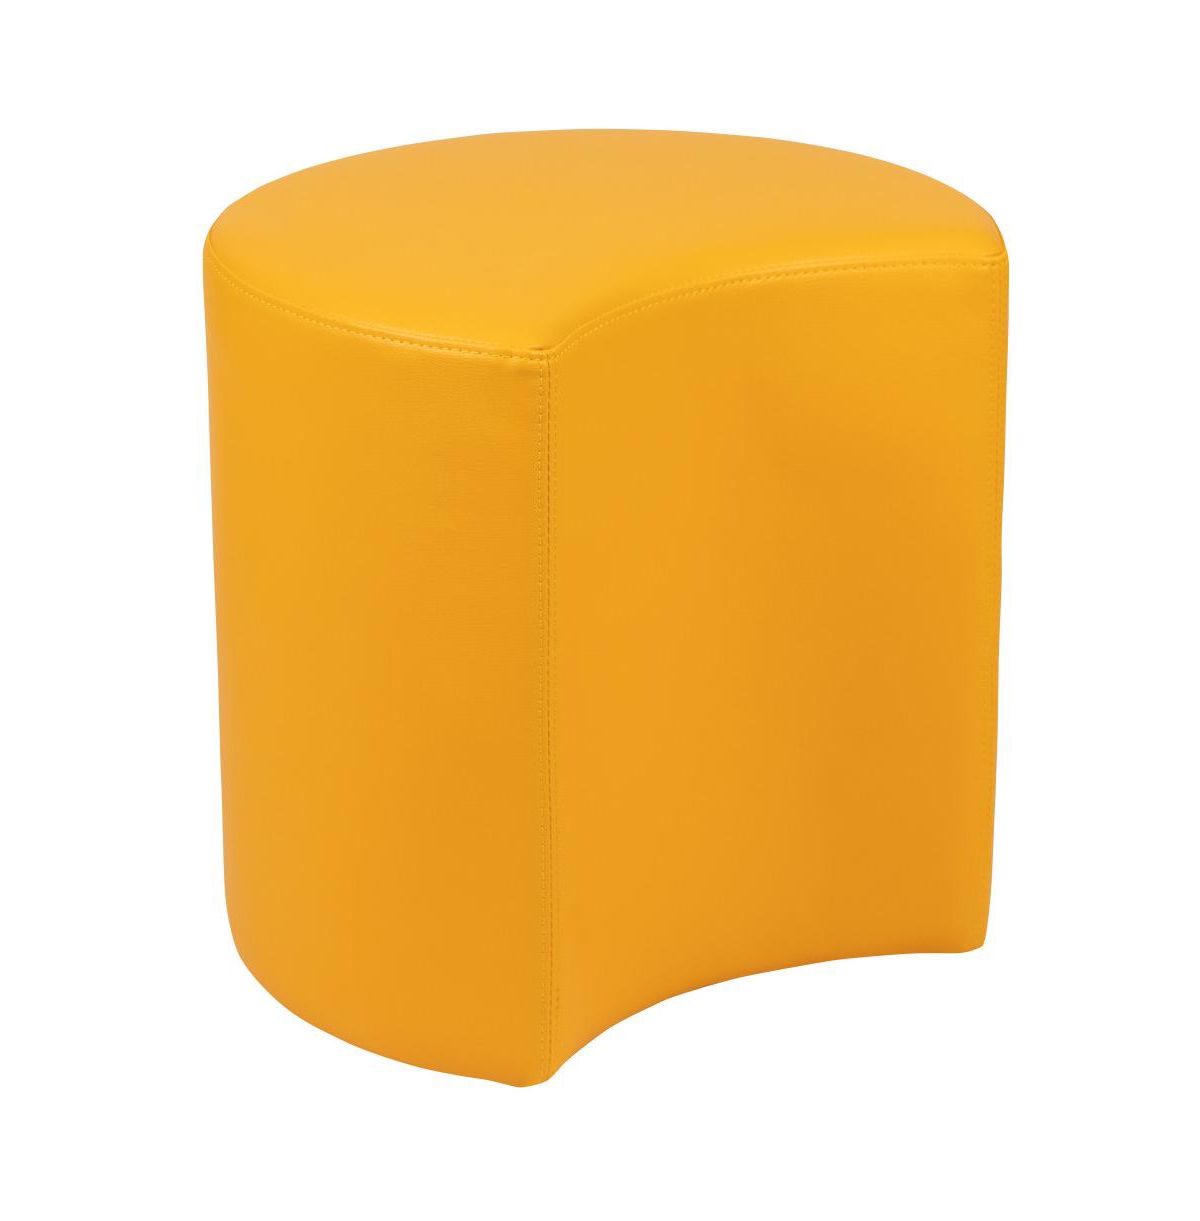 Emma+oliver 18"h Soft Seating Flexible Moon Backless Ottoman Chair For Classrooms And Common Spaces In Yellow